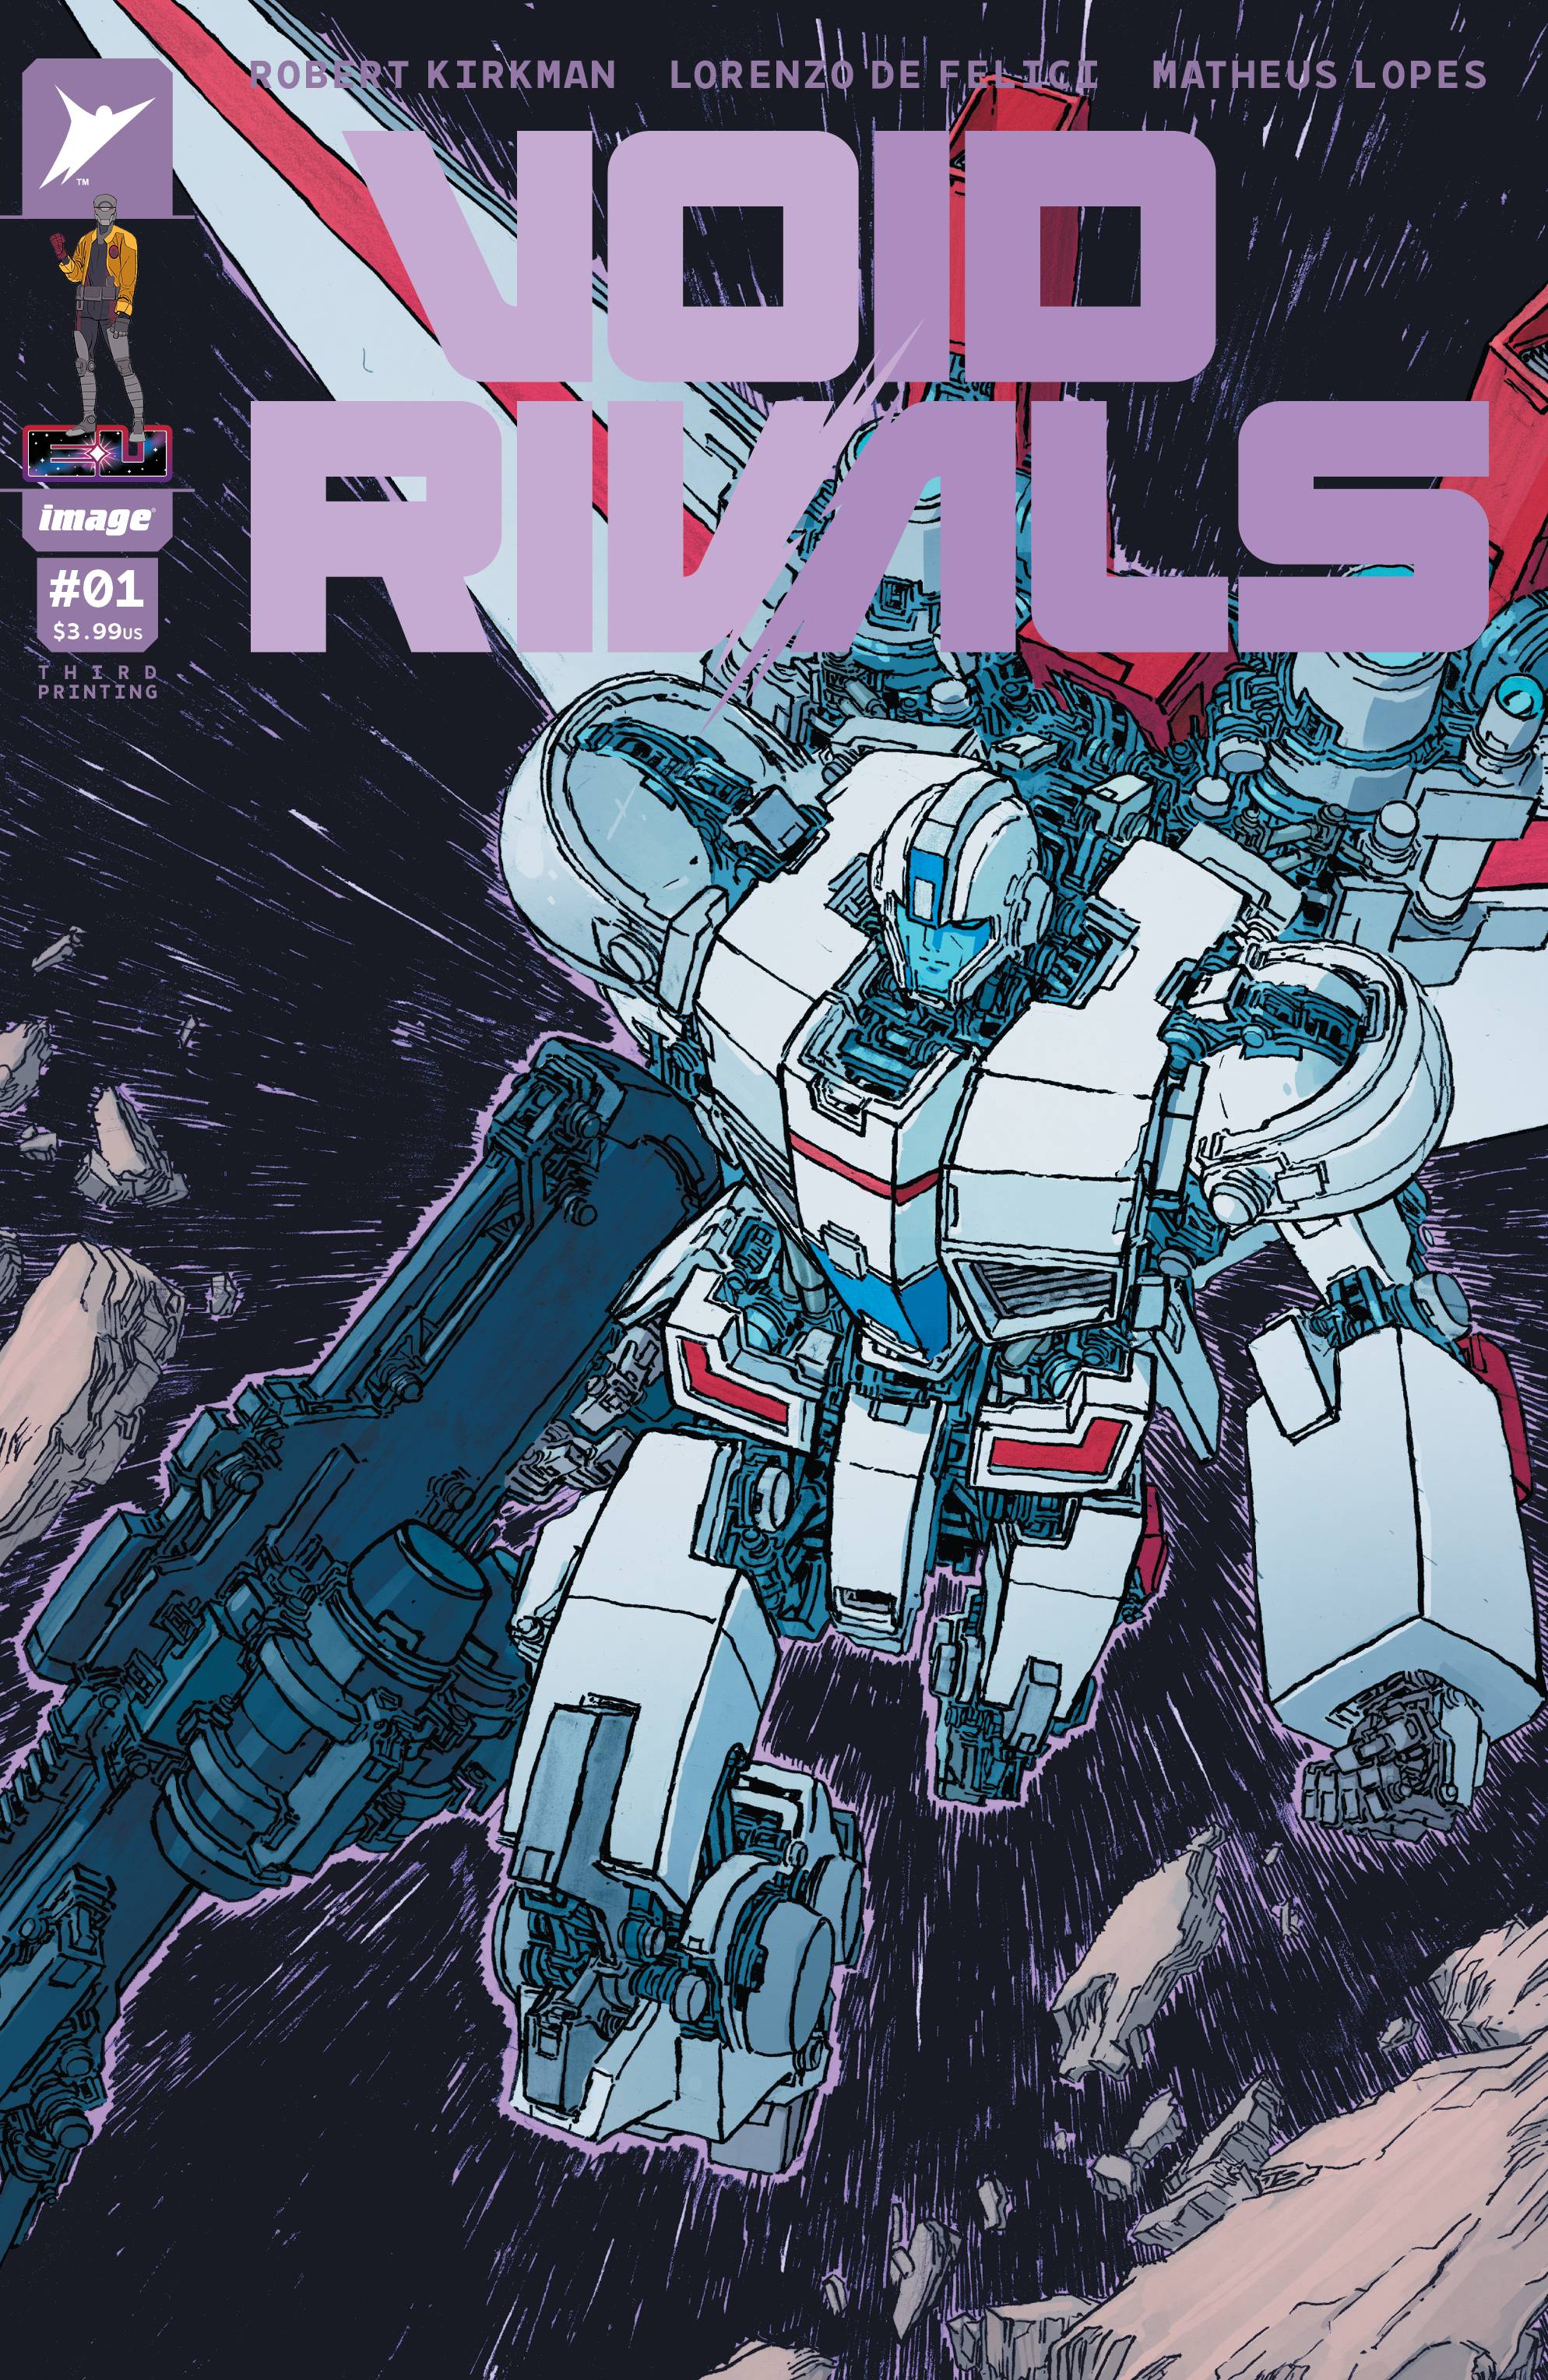 VOID RIVALS THE RETURN OF TRANSFORMERS